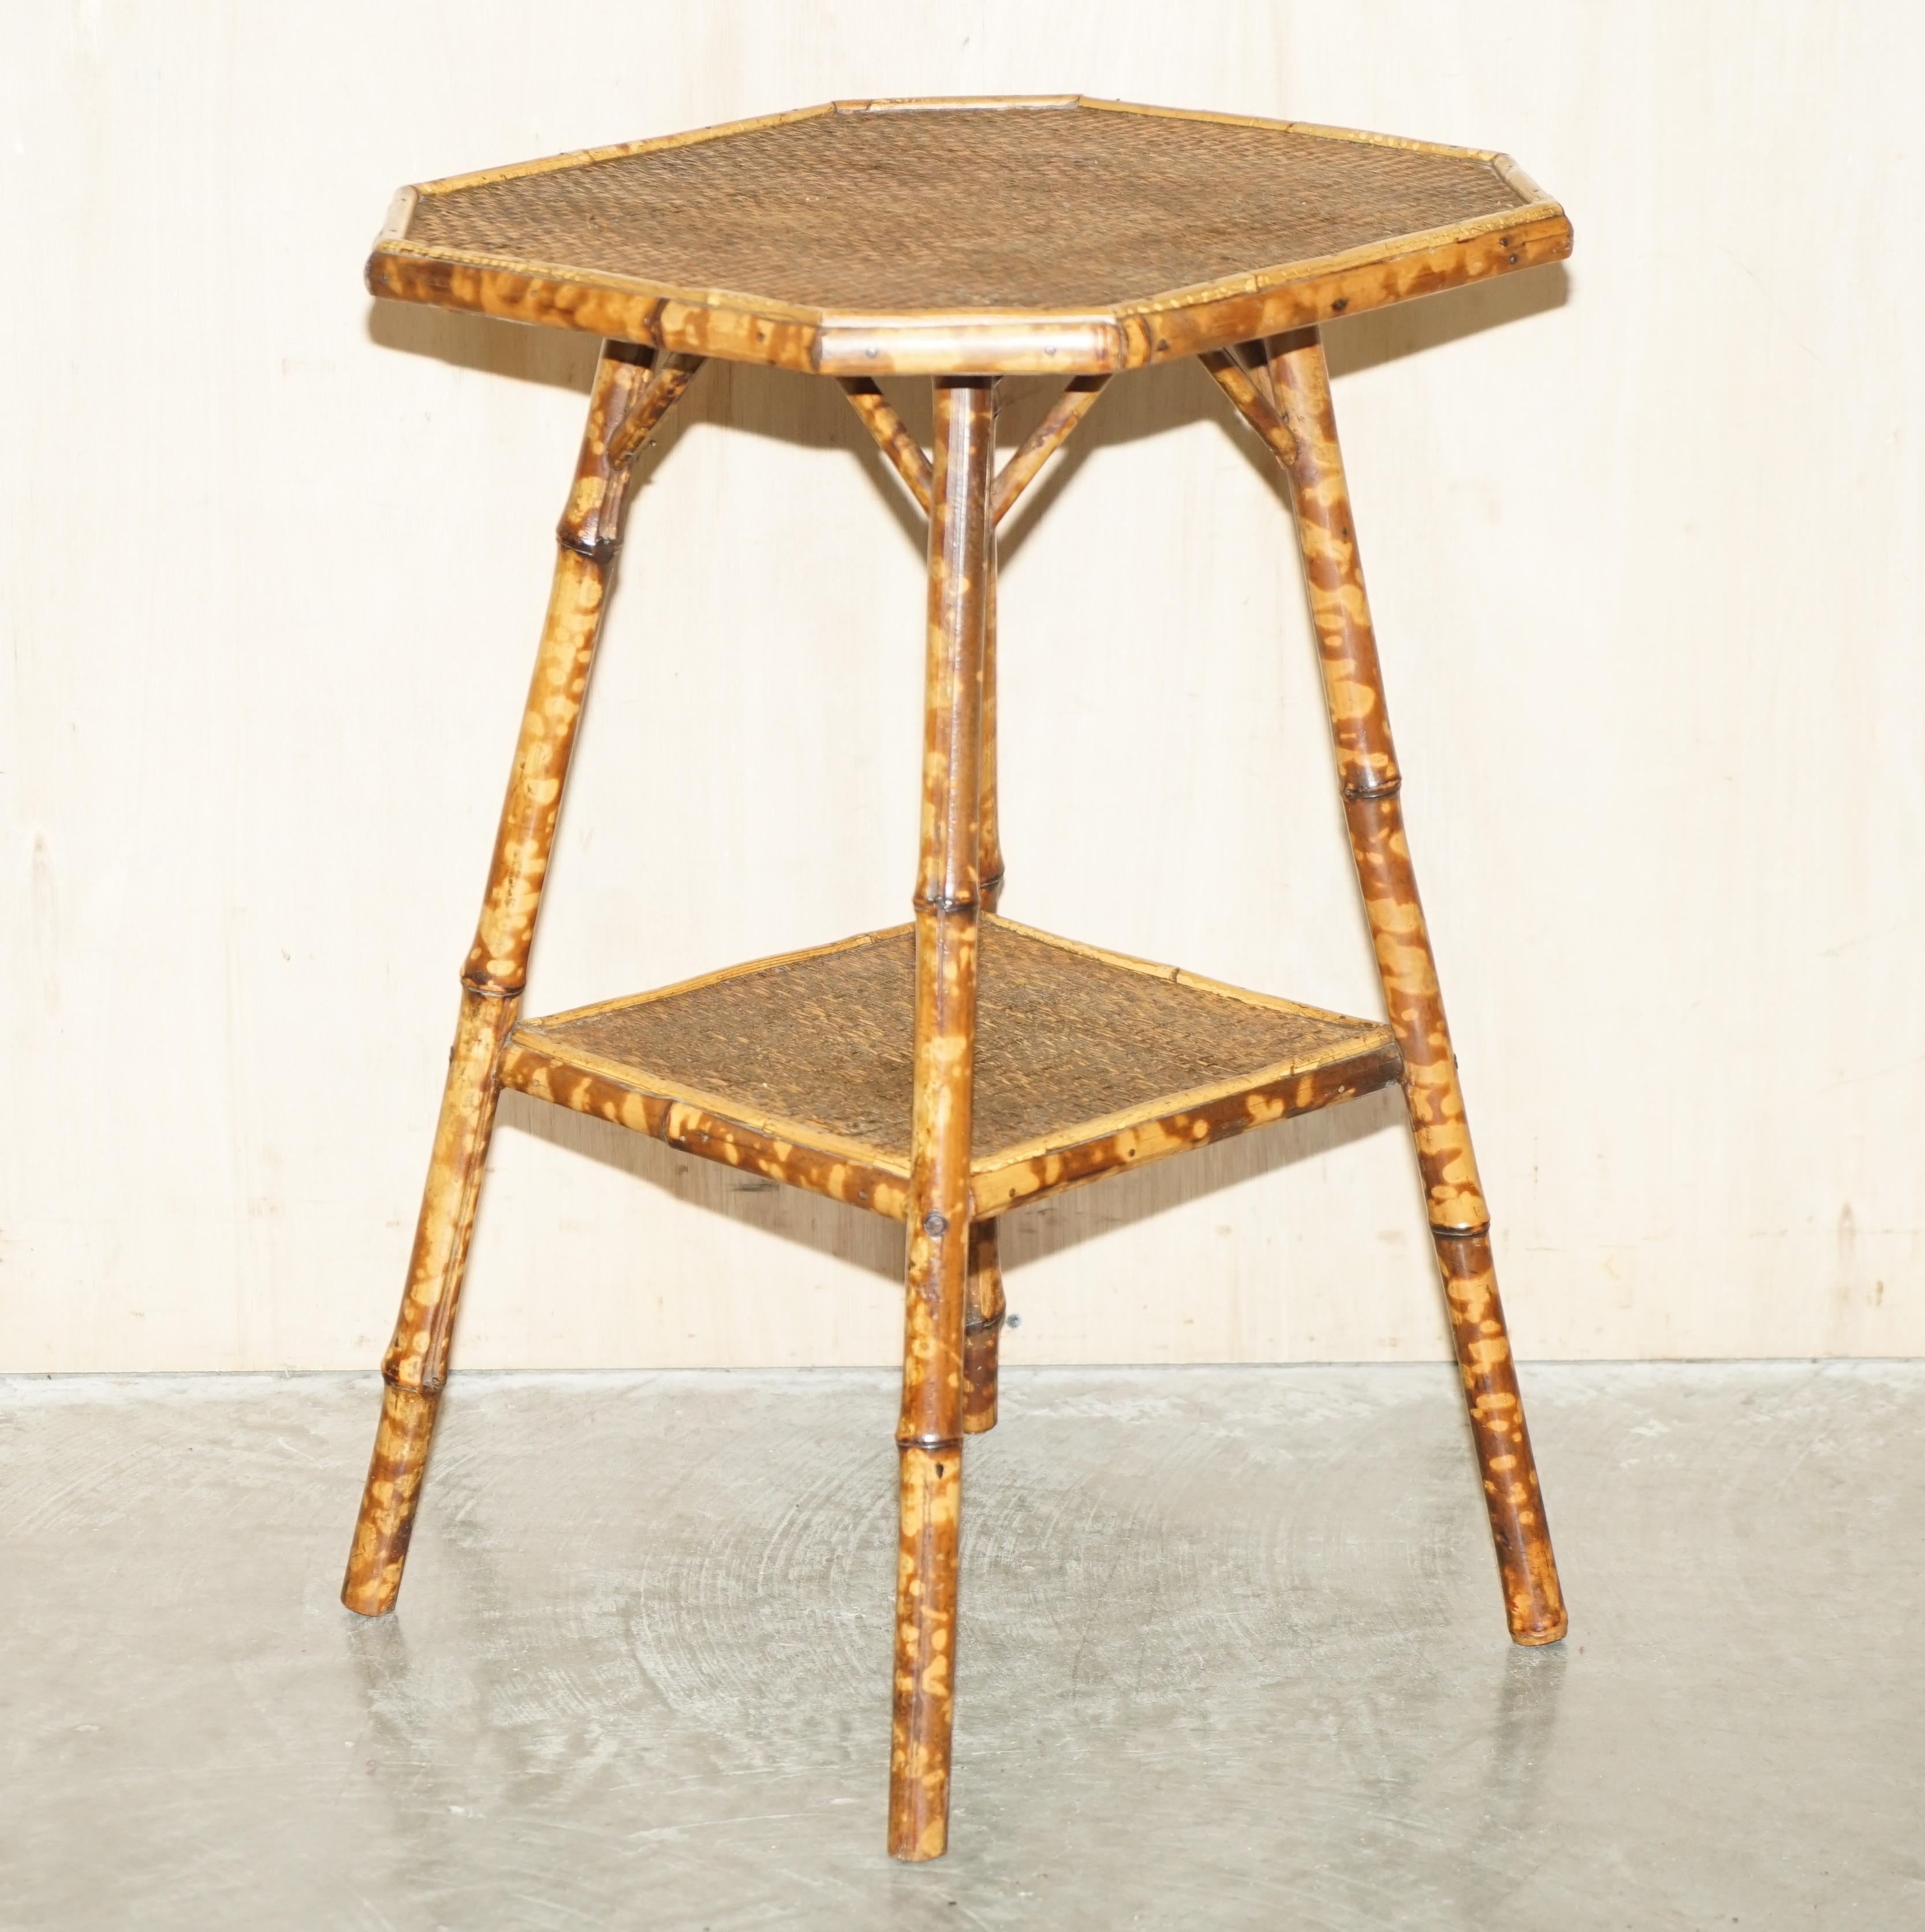 We are delighted to offer for sale this super collectable and original circa 1880 Antique Victorian Tiger Bamboo side table with period rattan woven top and tortoises shell patina 

A very good looking well-made and highly decorative table. These